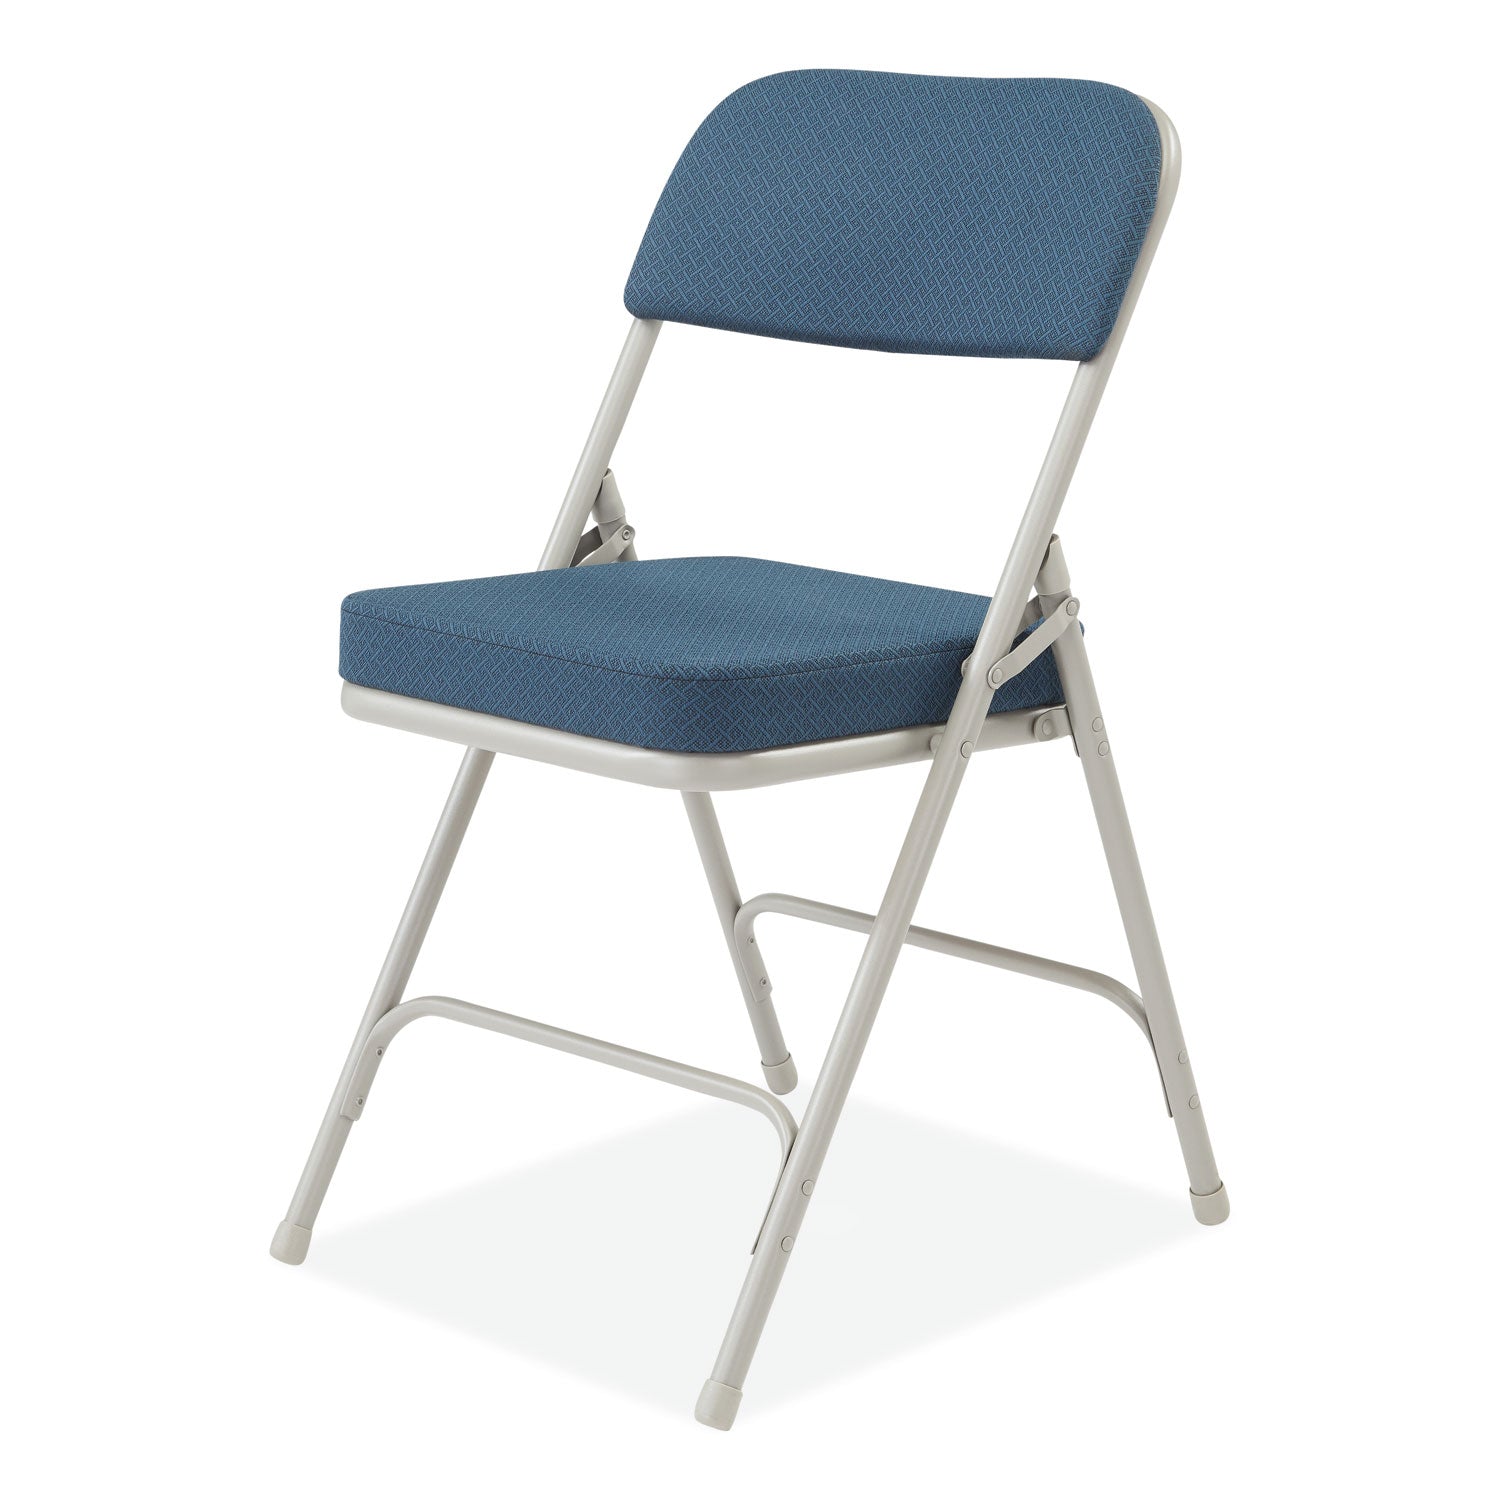 3200-series-fabric-dual-hinge-folding-chair-supports-300-lb-regal-blue-seat-back-gray-base-2-ct-ships-in-1-3-bus-days_nps3215 - 3